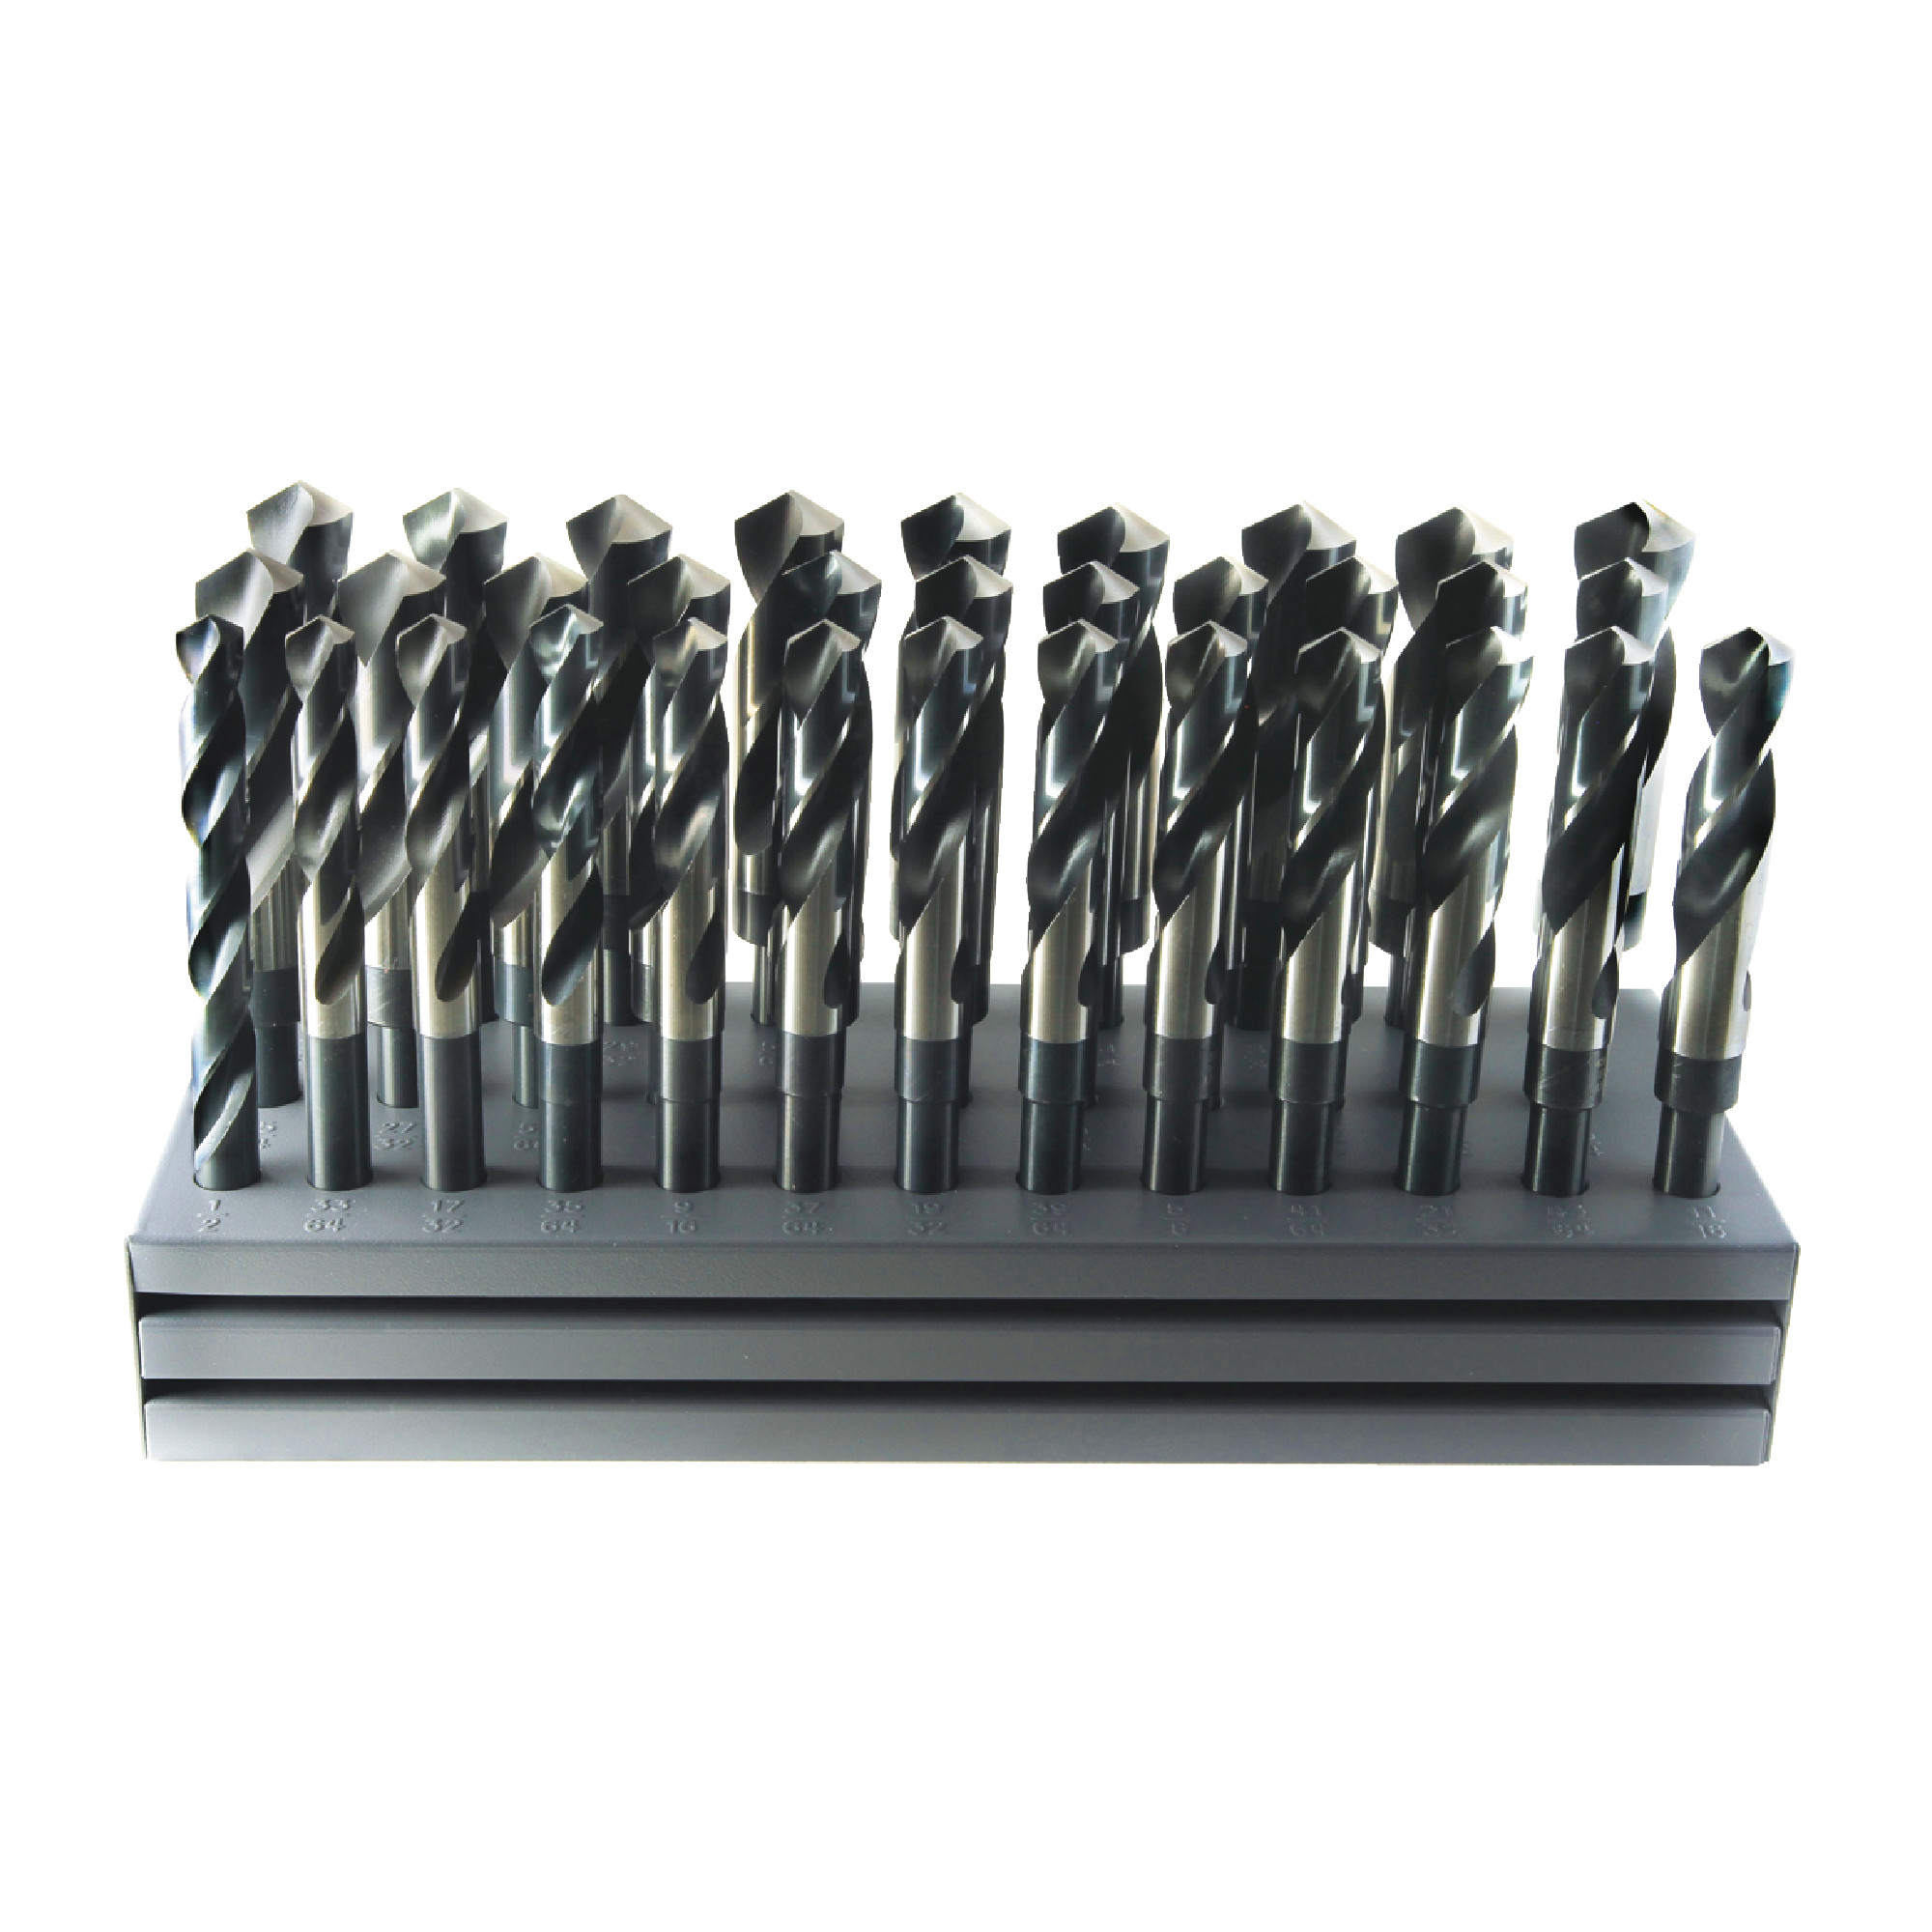 DRILLCO High Speed Steel 1/2" Shank Silver & Deming Drill Stand 1/2"-1" x 64ths W/ Drills 1000A32